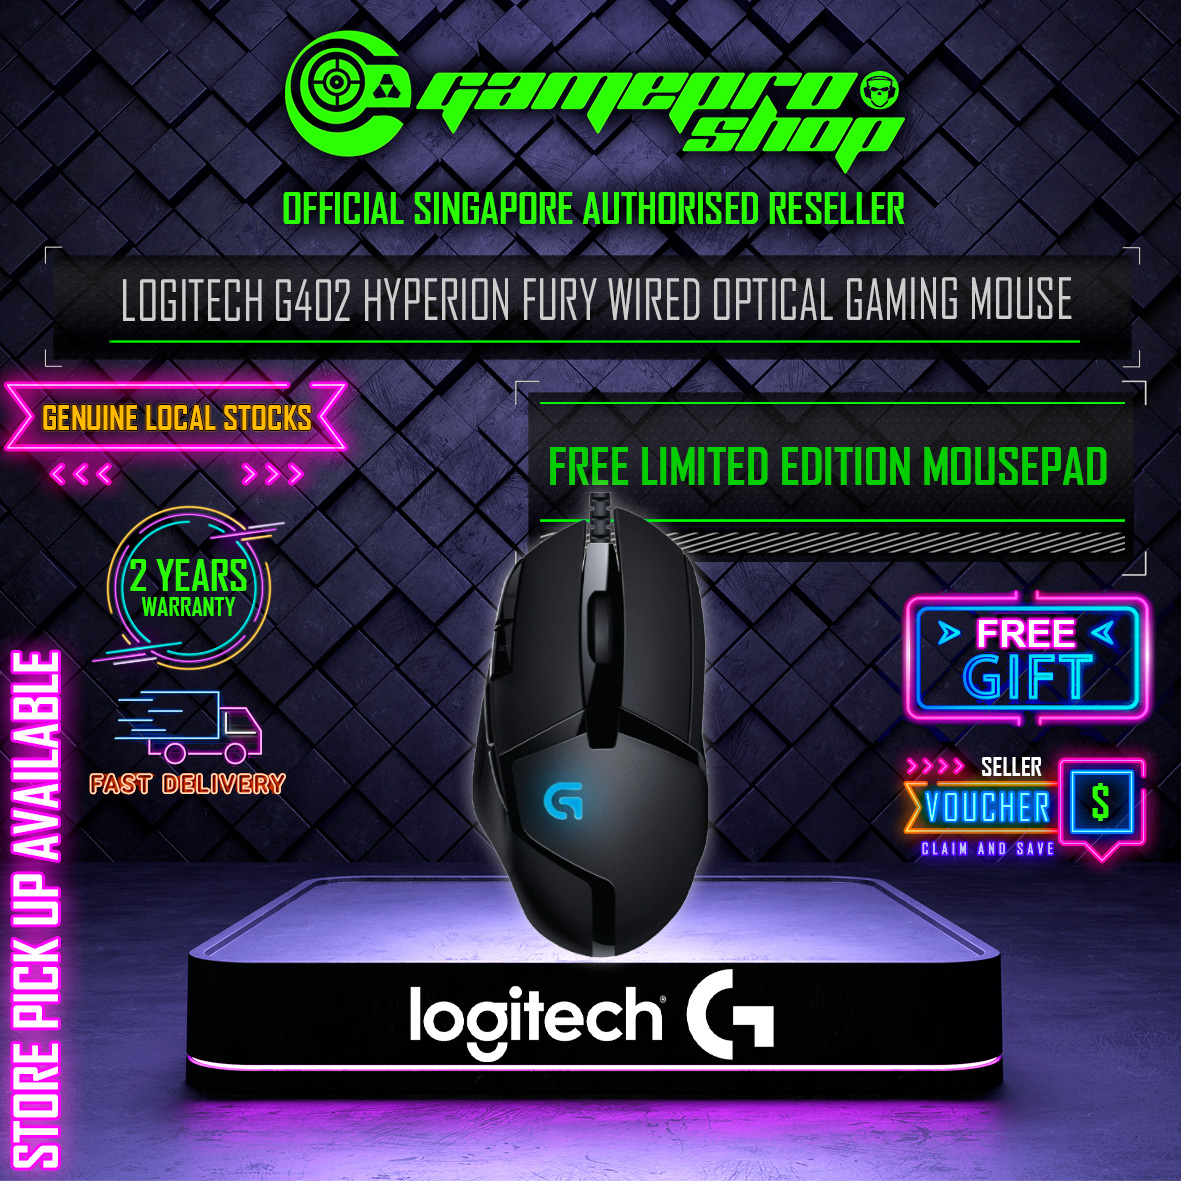 https://gameprosg.com/wp-content/uploads/2017/03/Logitech-G402-Hyperion-Fury-WIRED-Optical-Gaming-Mouse.jpg